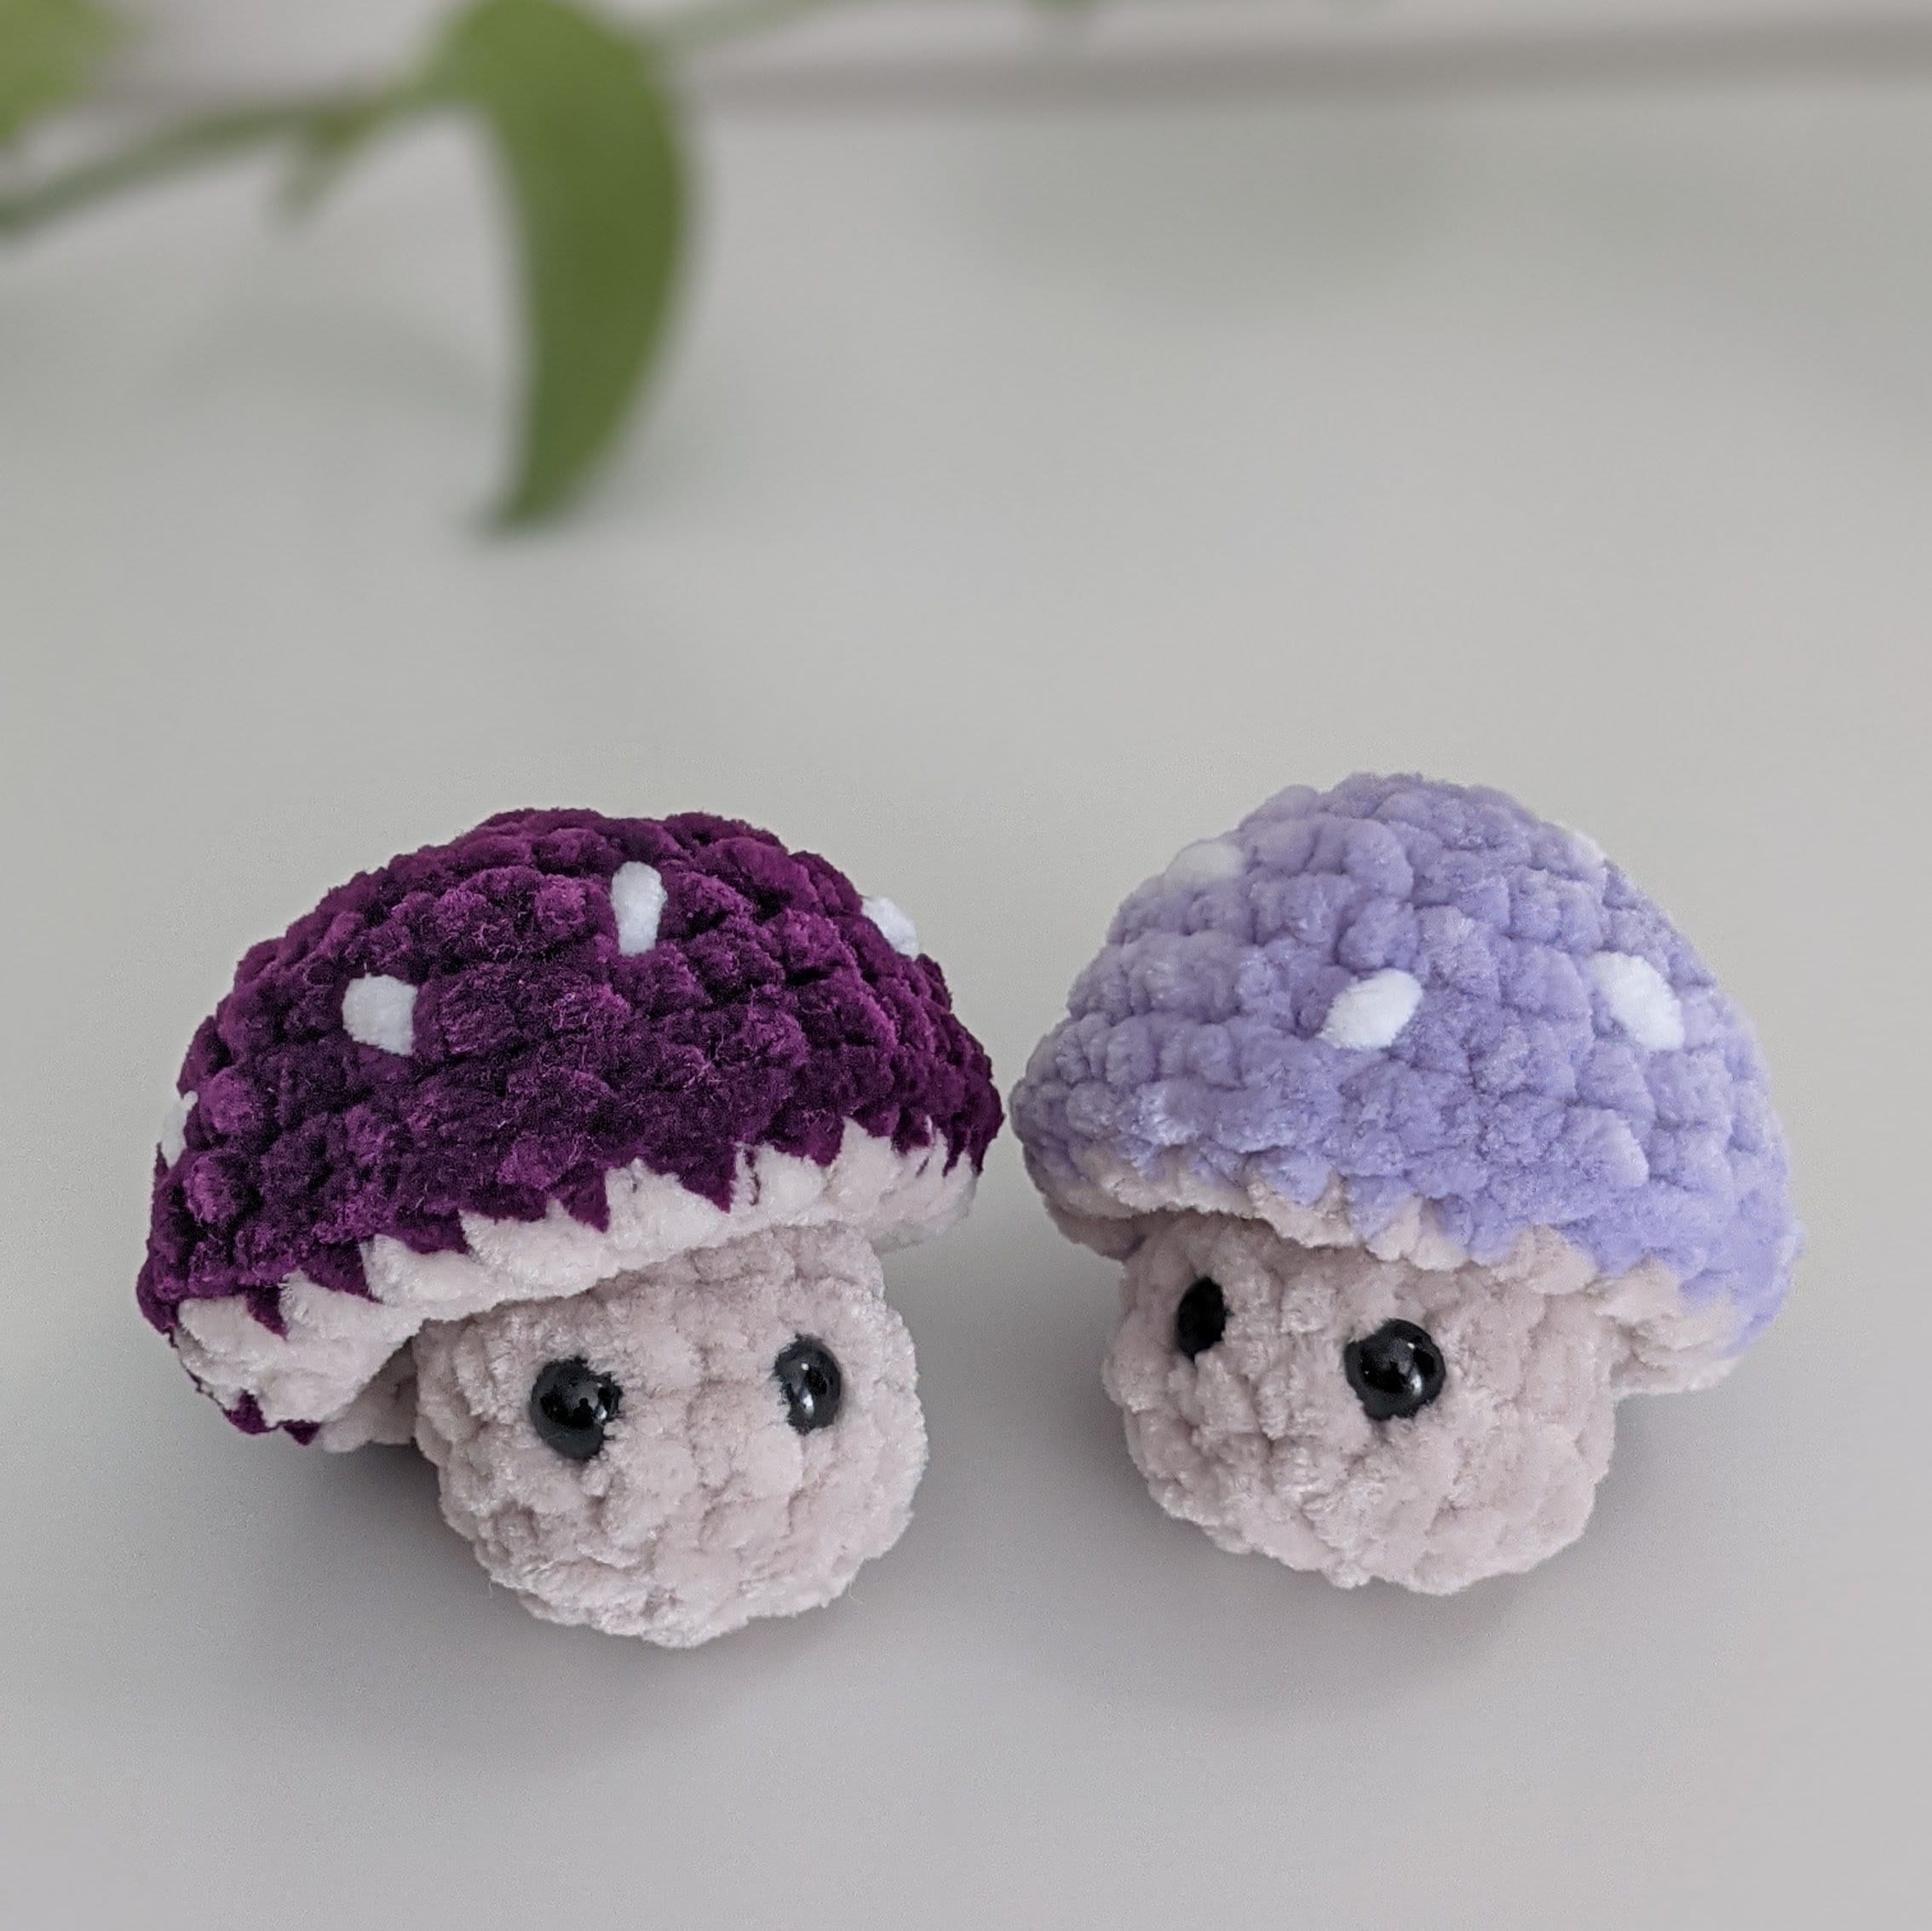 Mini Crochet Pop-up Mushroom Lucky Charm Gift Anti-stress Emotional Support  Handmade Collection Grigri 